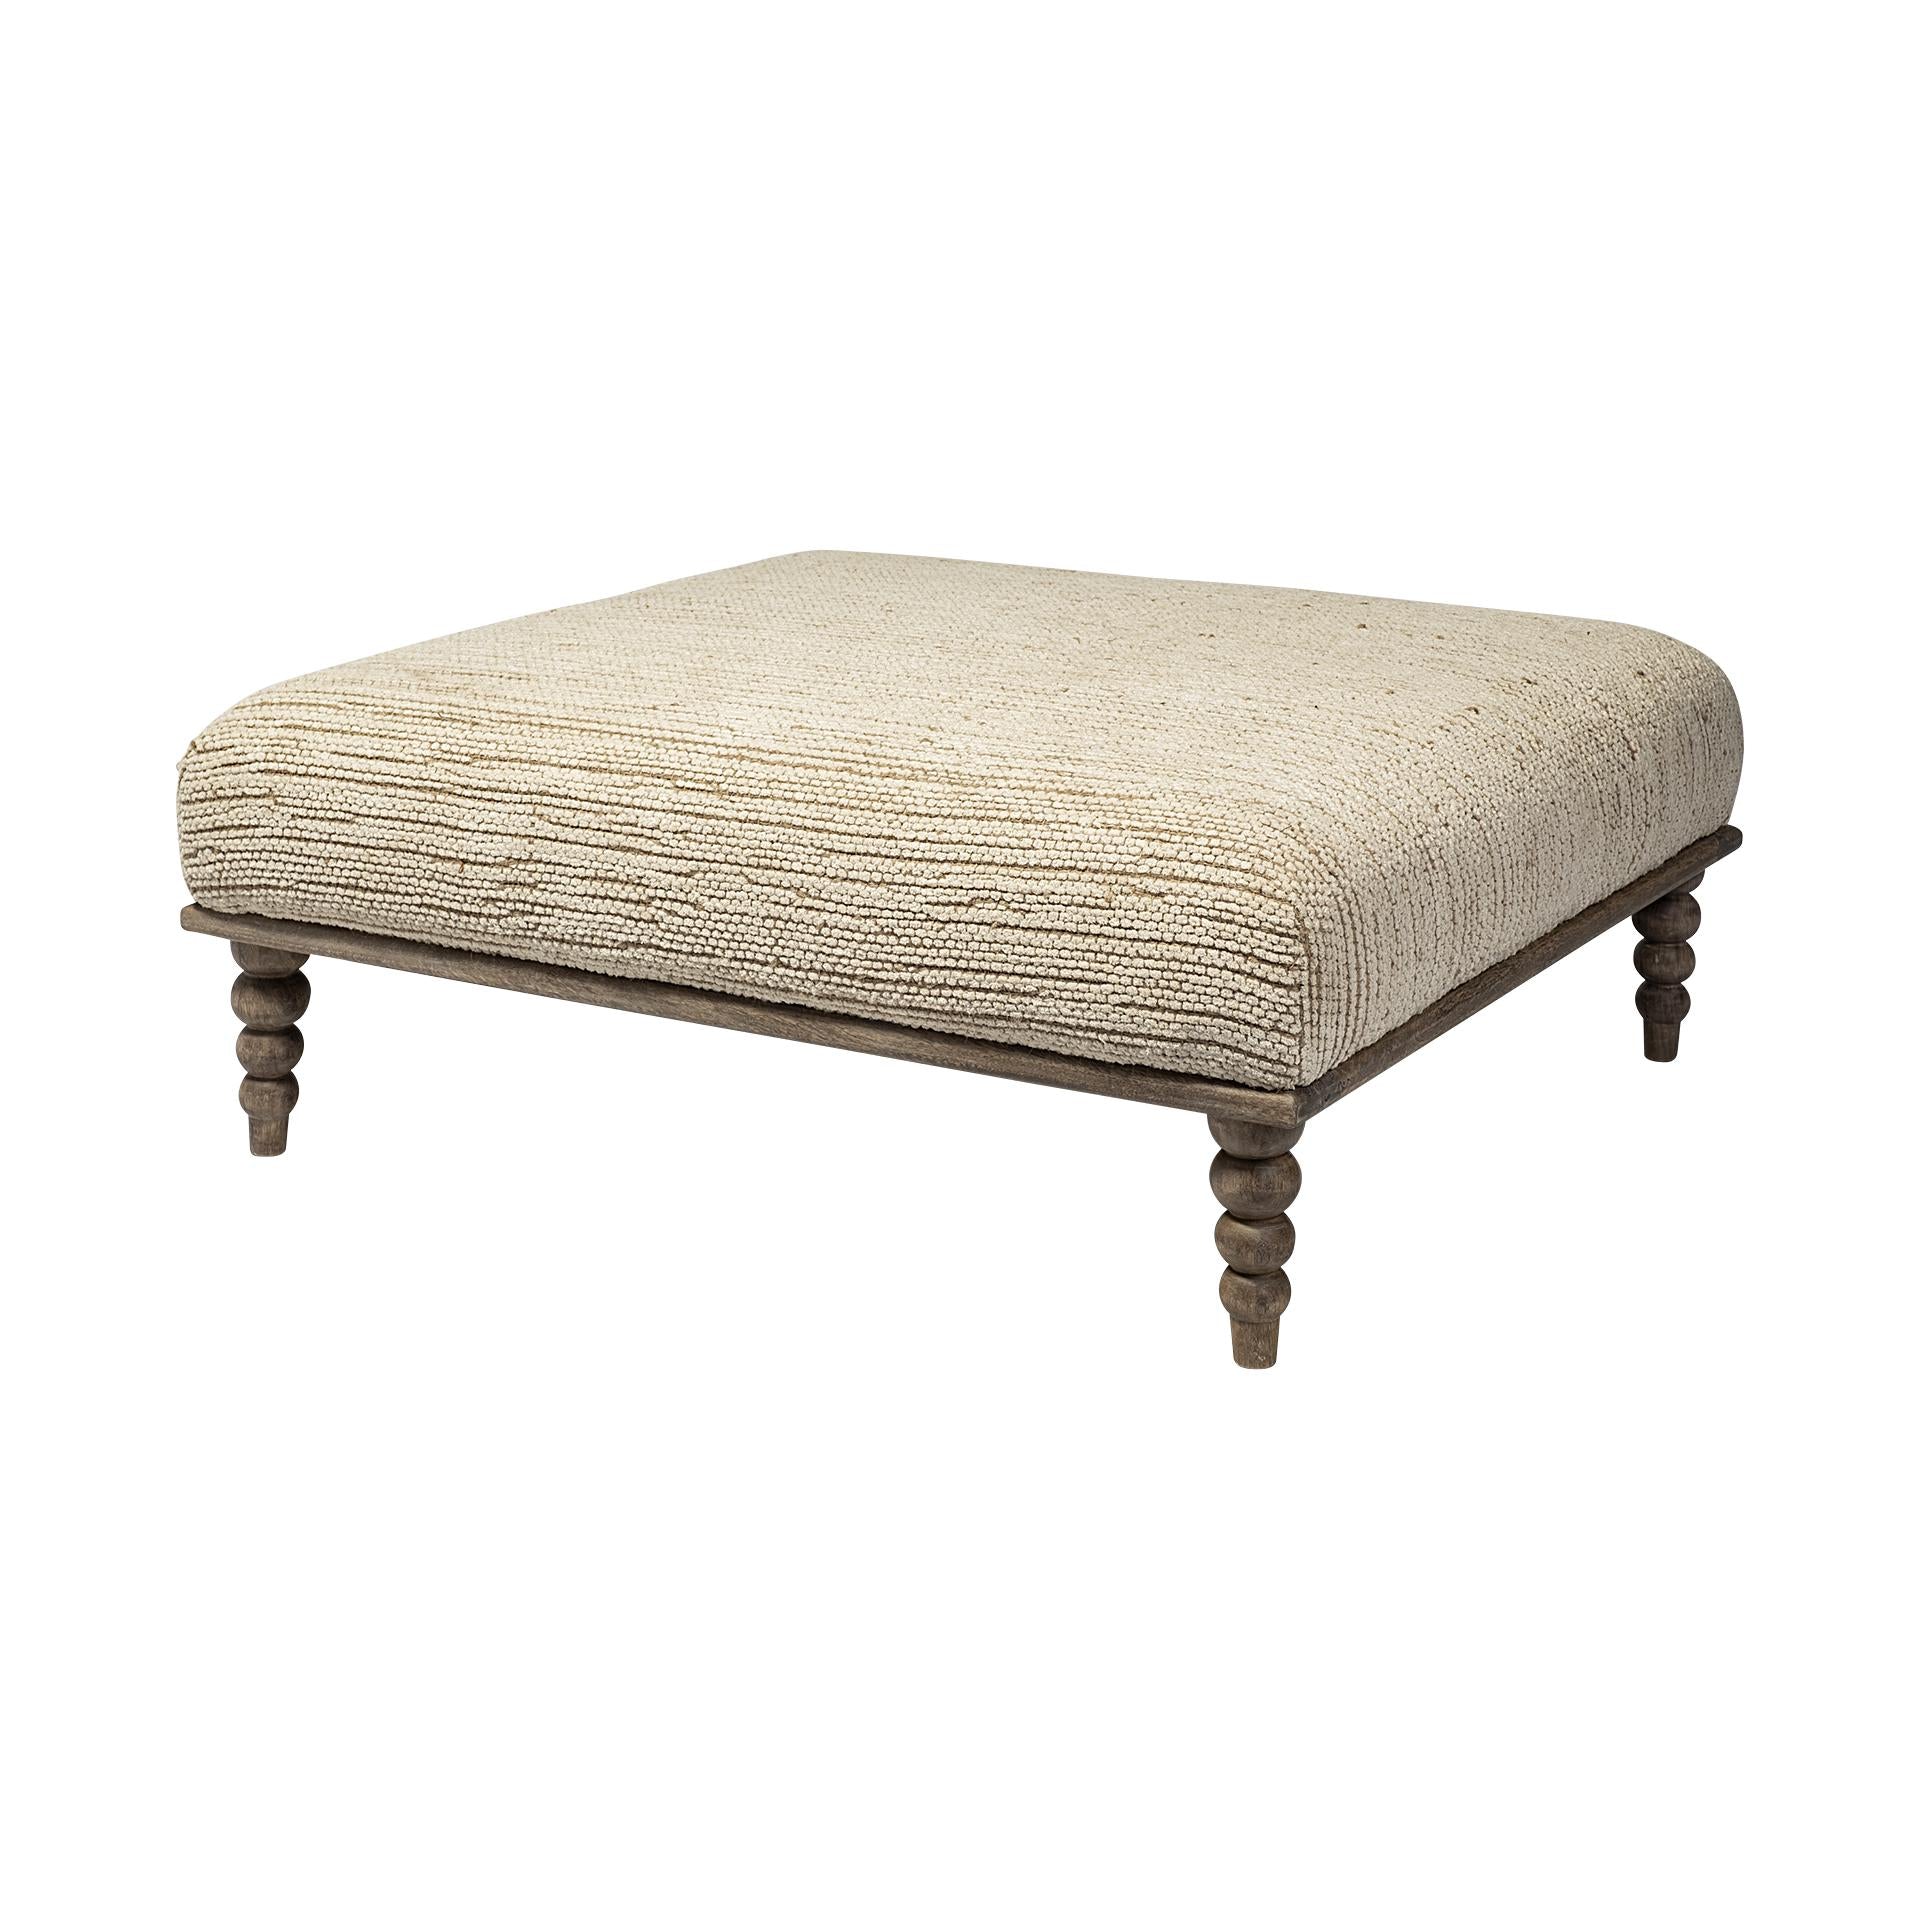 Square Indian Mango WoodNatural-Brown Polished W Upholstered Cream Seat Accent Bench